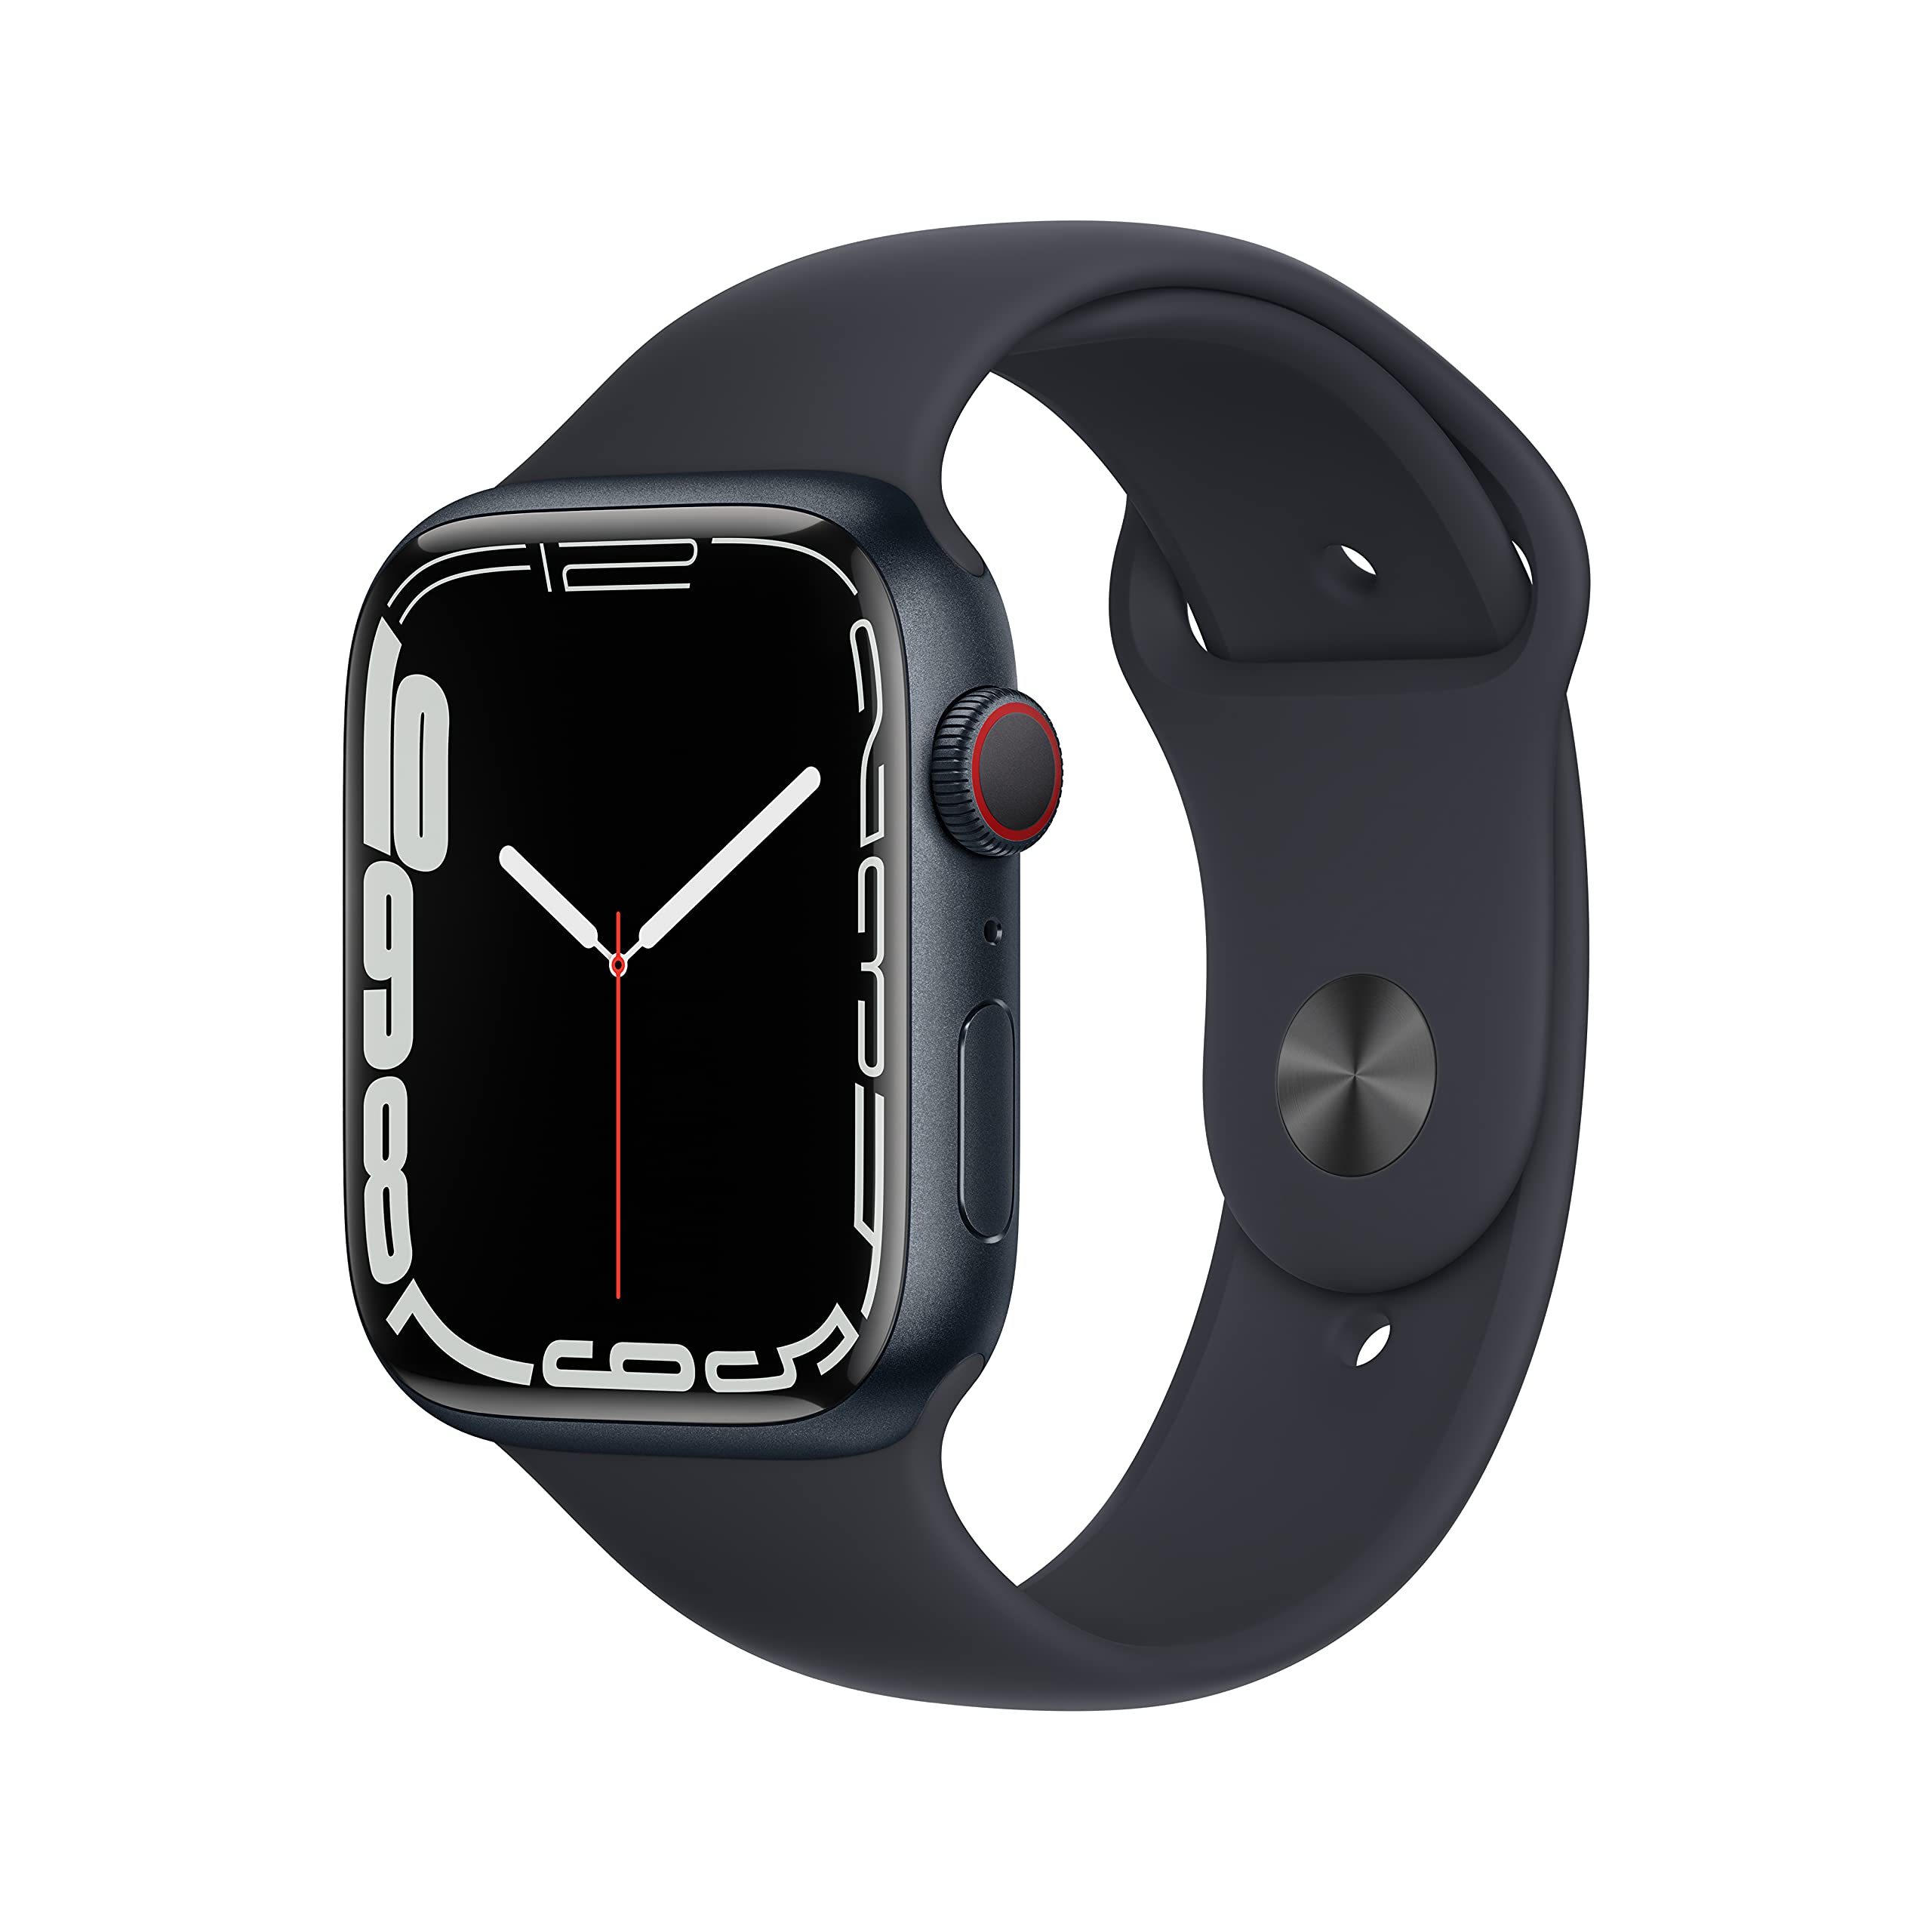 Apple Watch Series 7 [GPS + Cellular 45mm] Smart Watch w/Midnight Aluminum Case with Midnight Sport Band. Fitness Tracker, Blood Oxygen & ECG Apps, Always-On Retina Display, Water Resistant